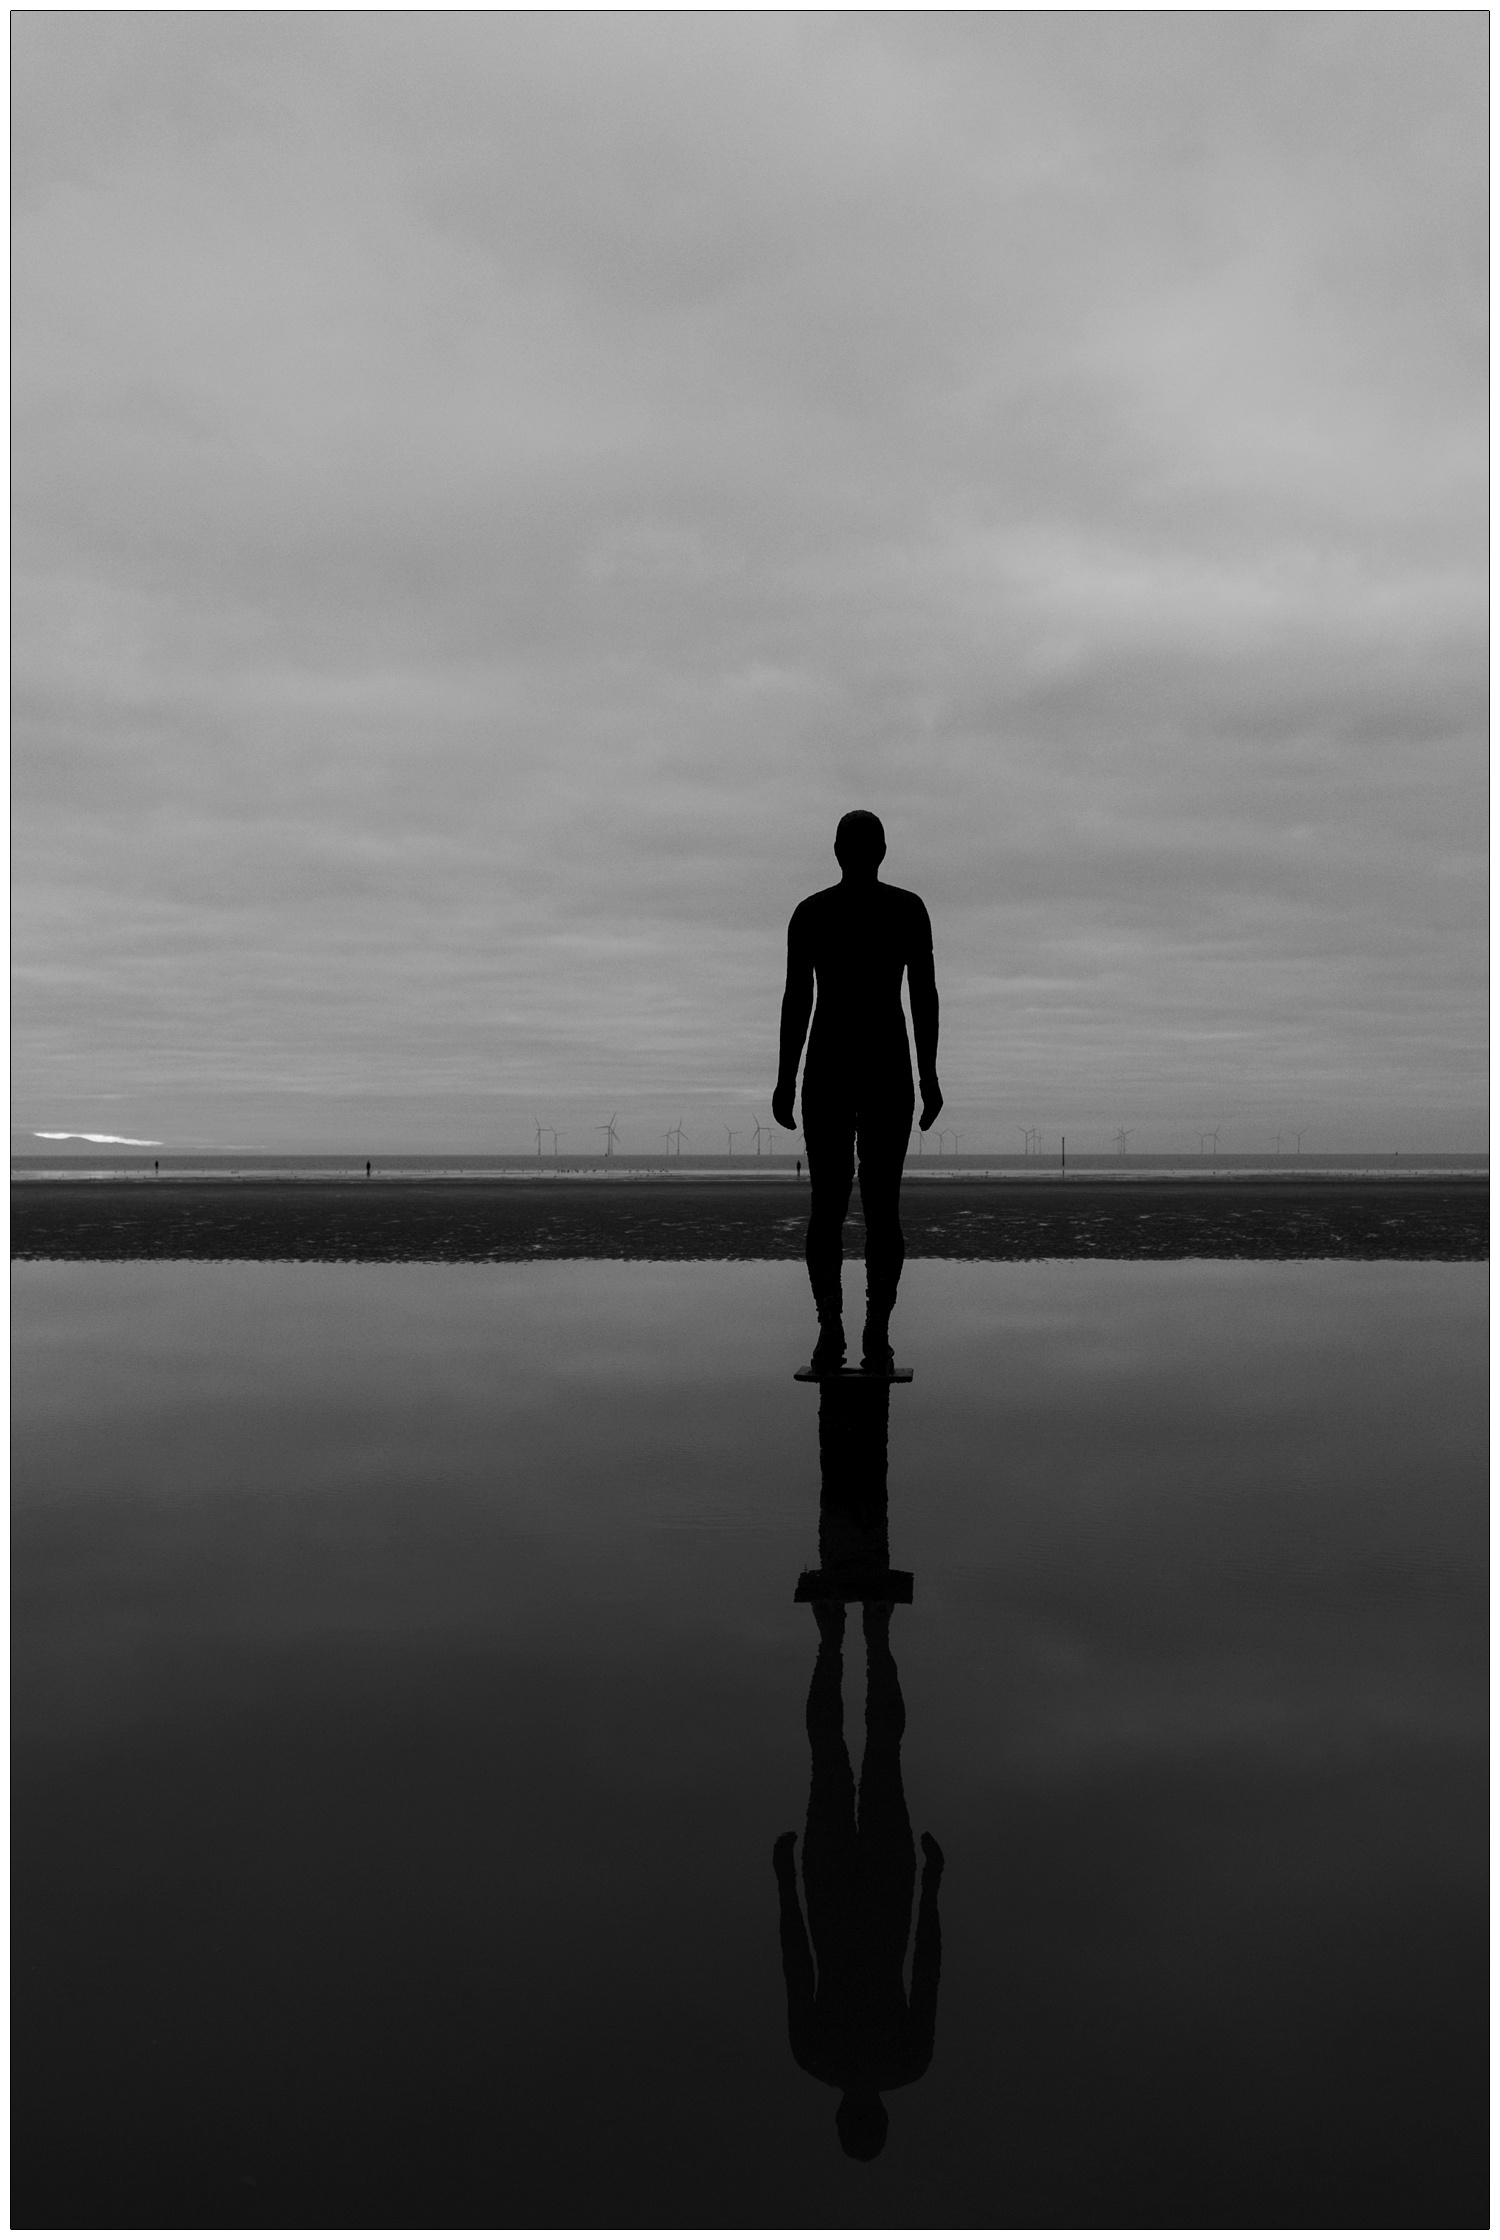 black and white photo of Another Place sculpture by Antony Gormley. The cast iron figure is reflected in the water and looks out at wind turbines on Crosby beach